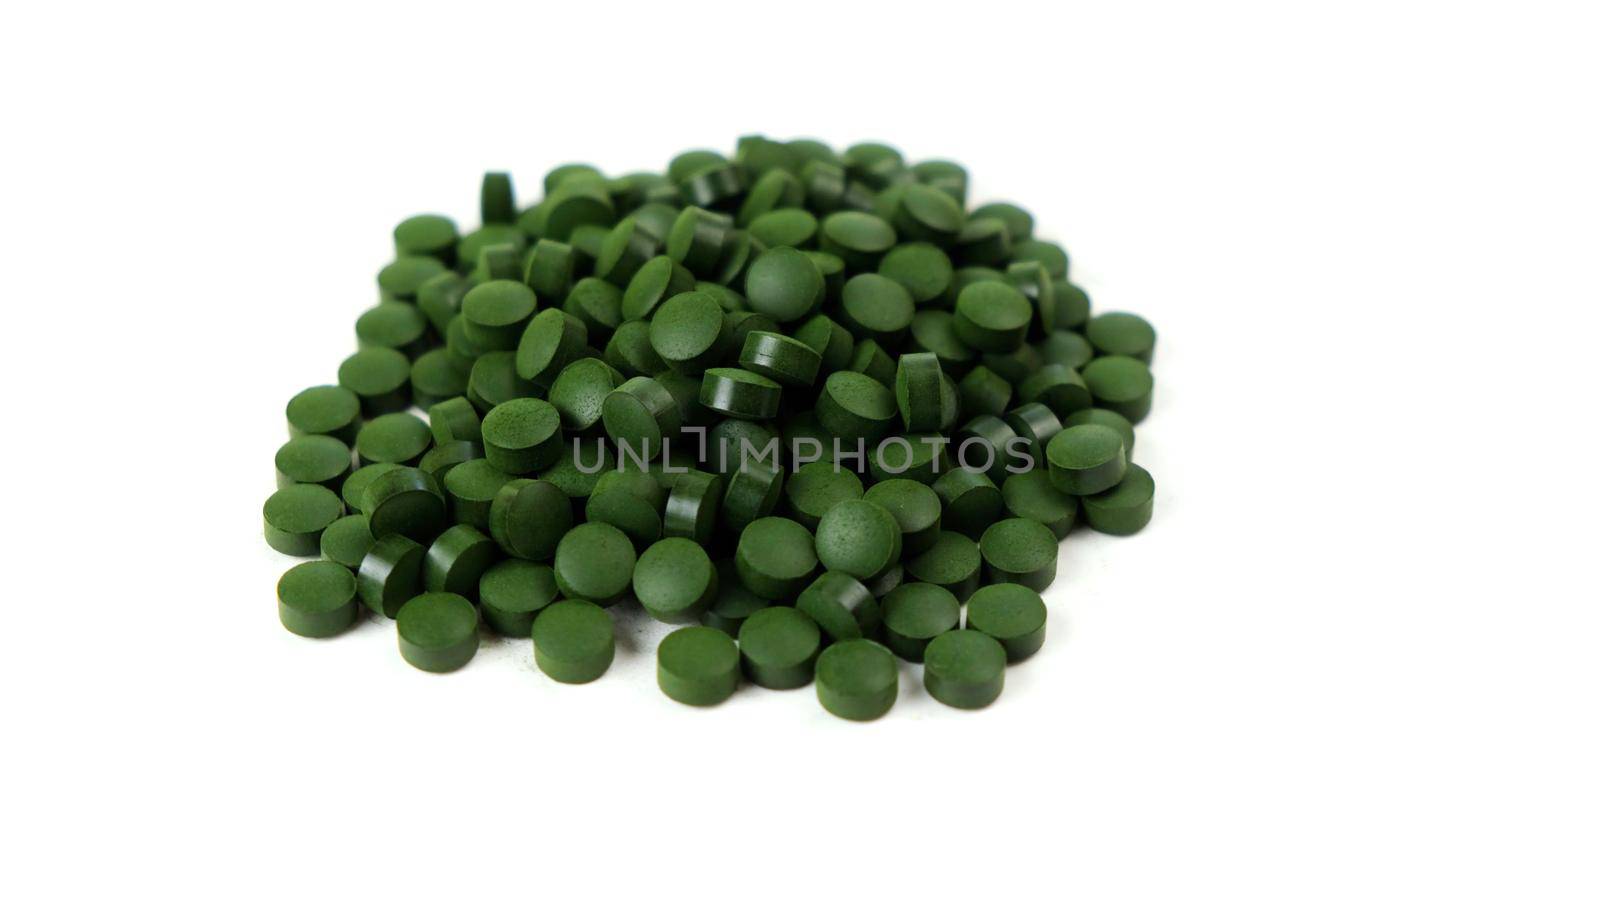 Spirulina algae tablets isolated on white background. Nutritional supplements, vitamins and health concept.